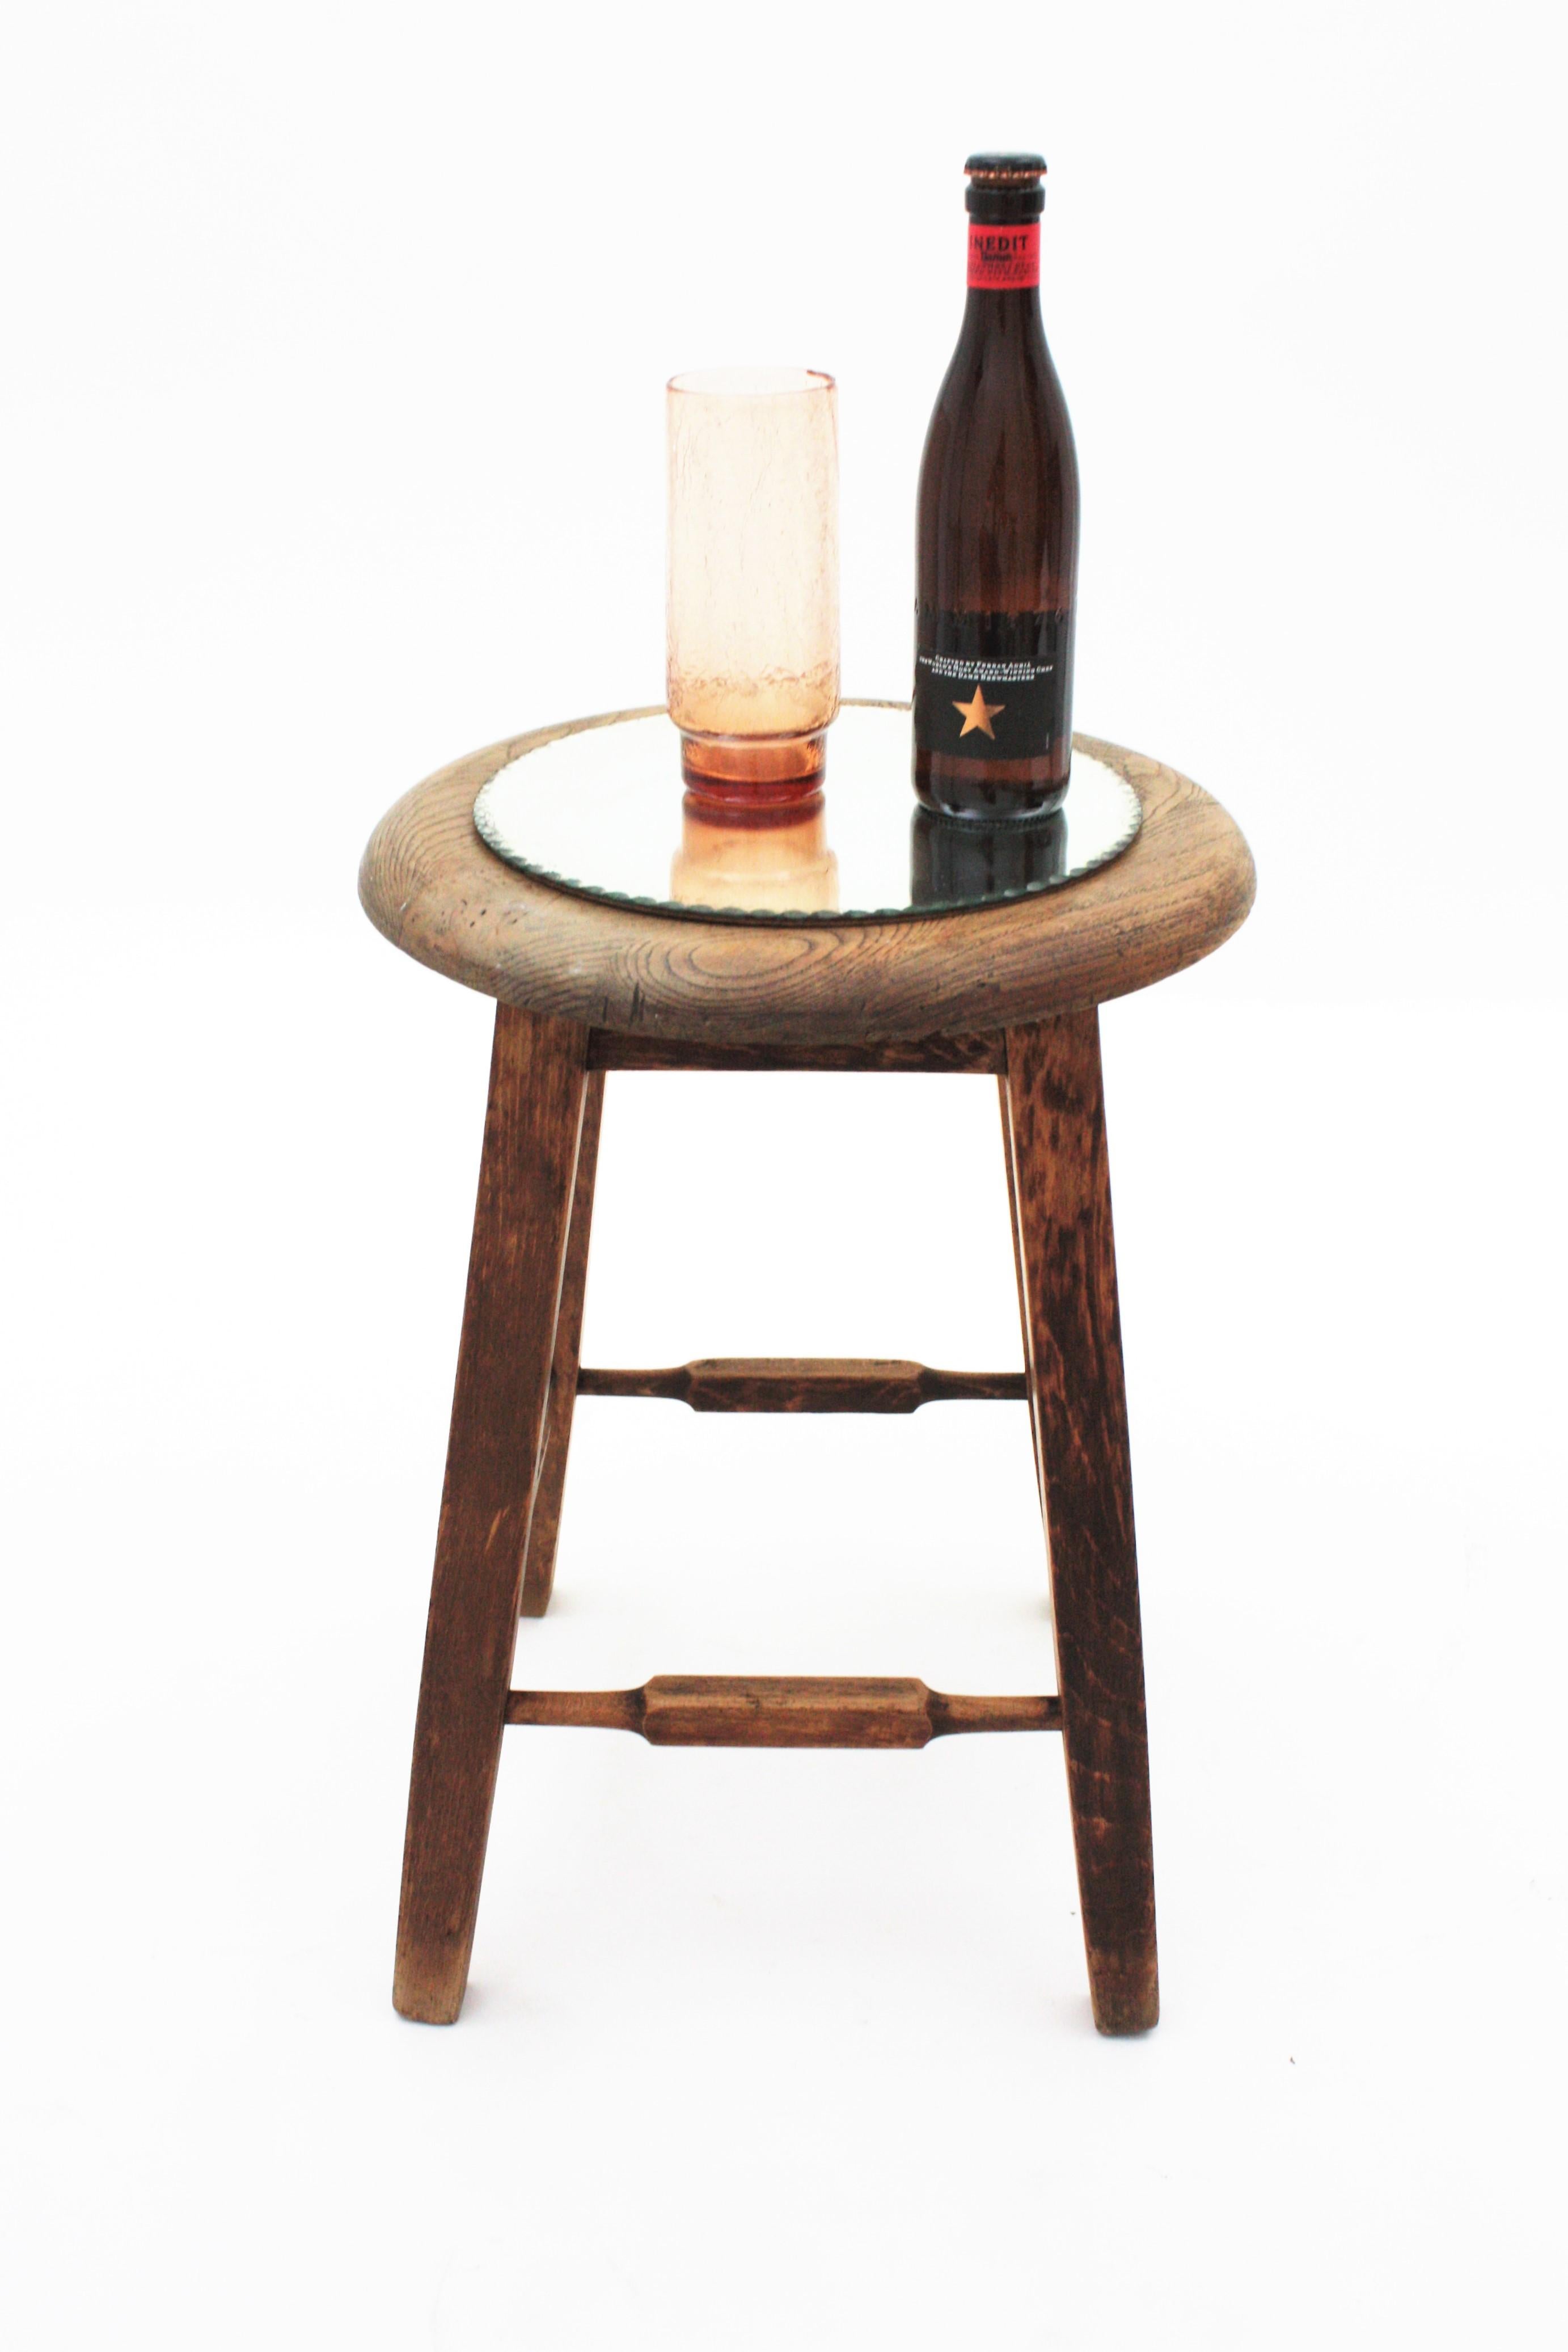 20th Century Spanish Industrial Stool in Oak Wood, 1940s For Sale